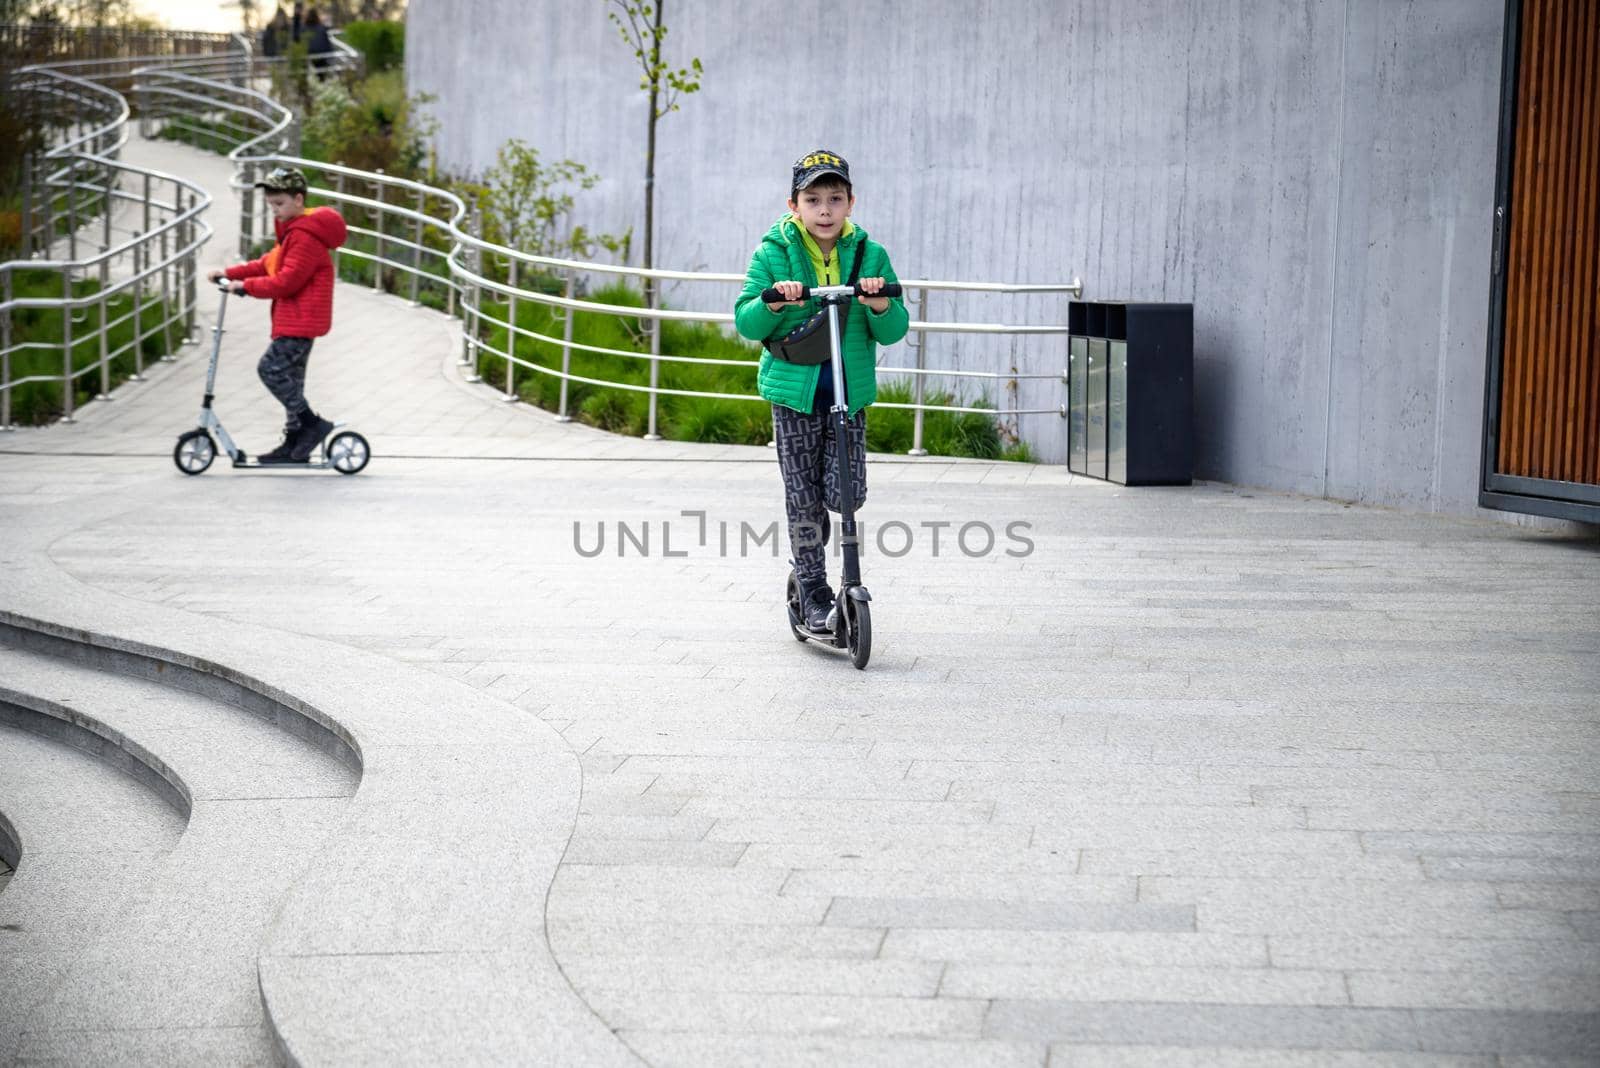 Happy family lifestyle and holiday concept. little boy and his sibling brother riding scooters, walking in city, street. Having fun.